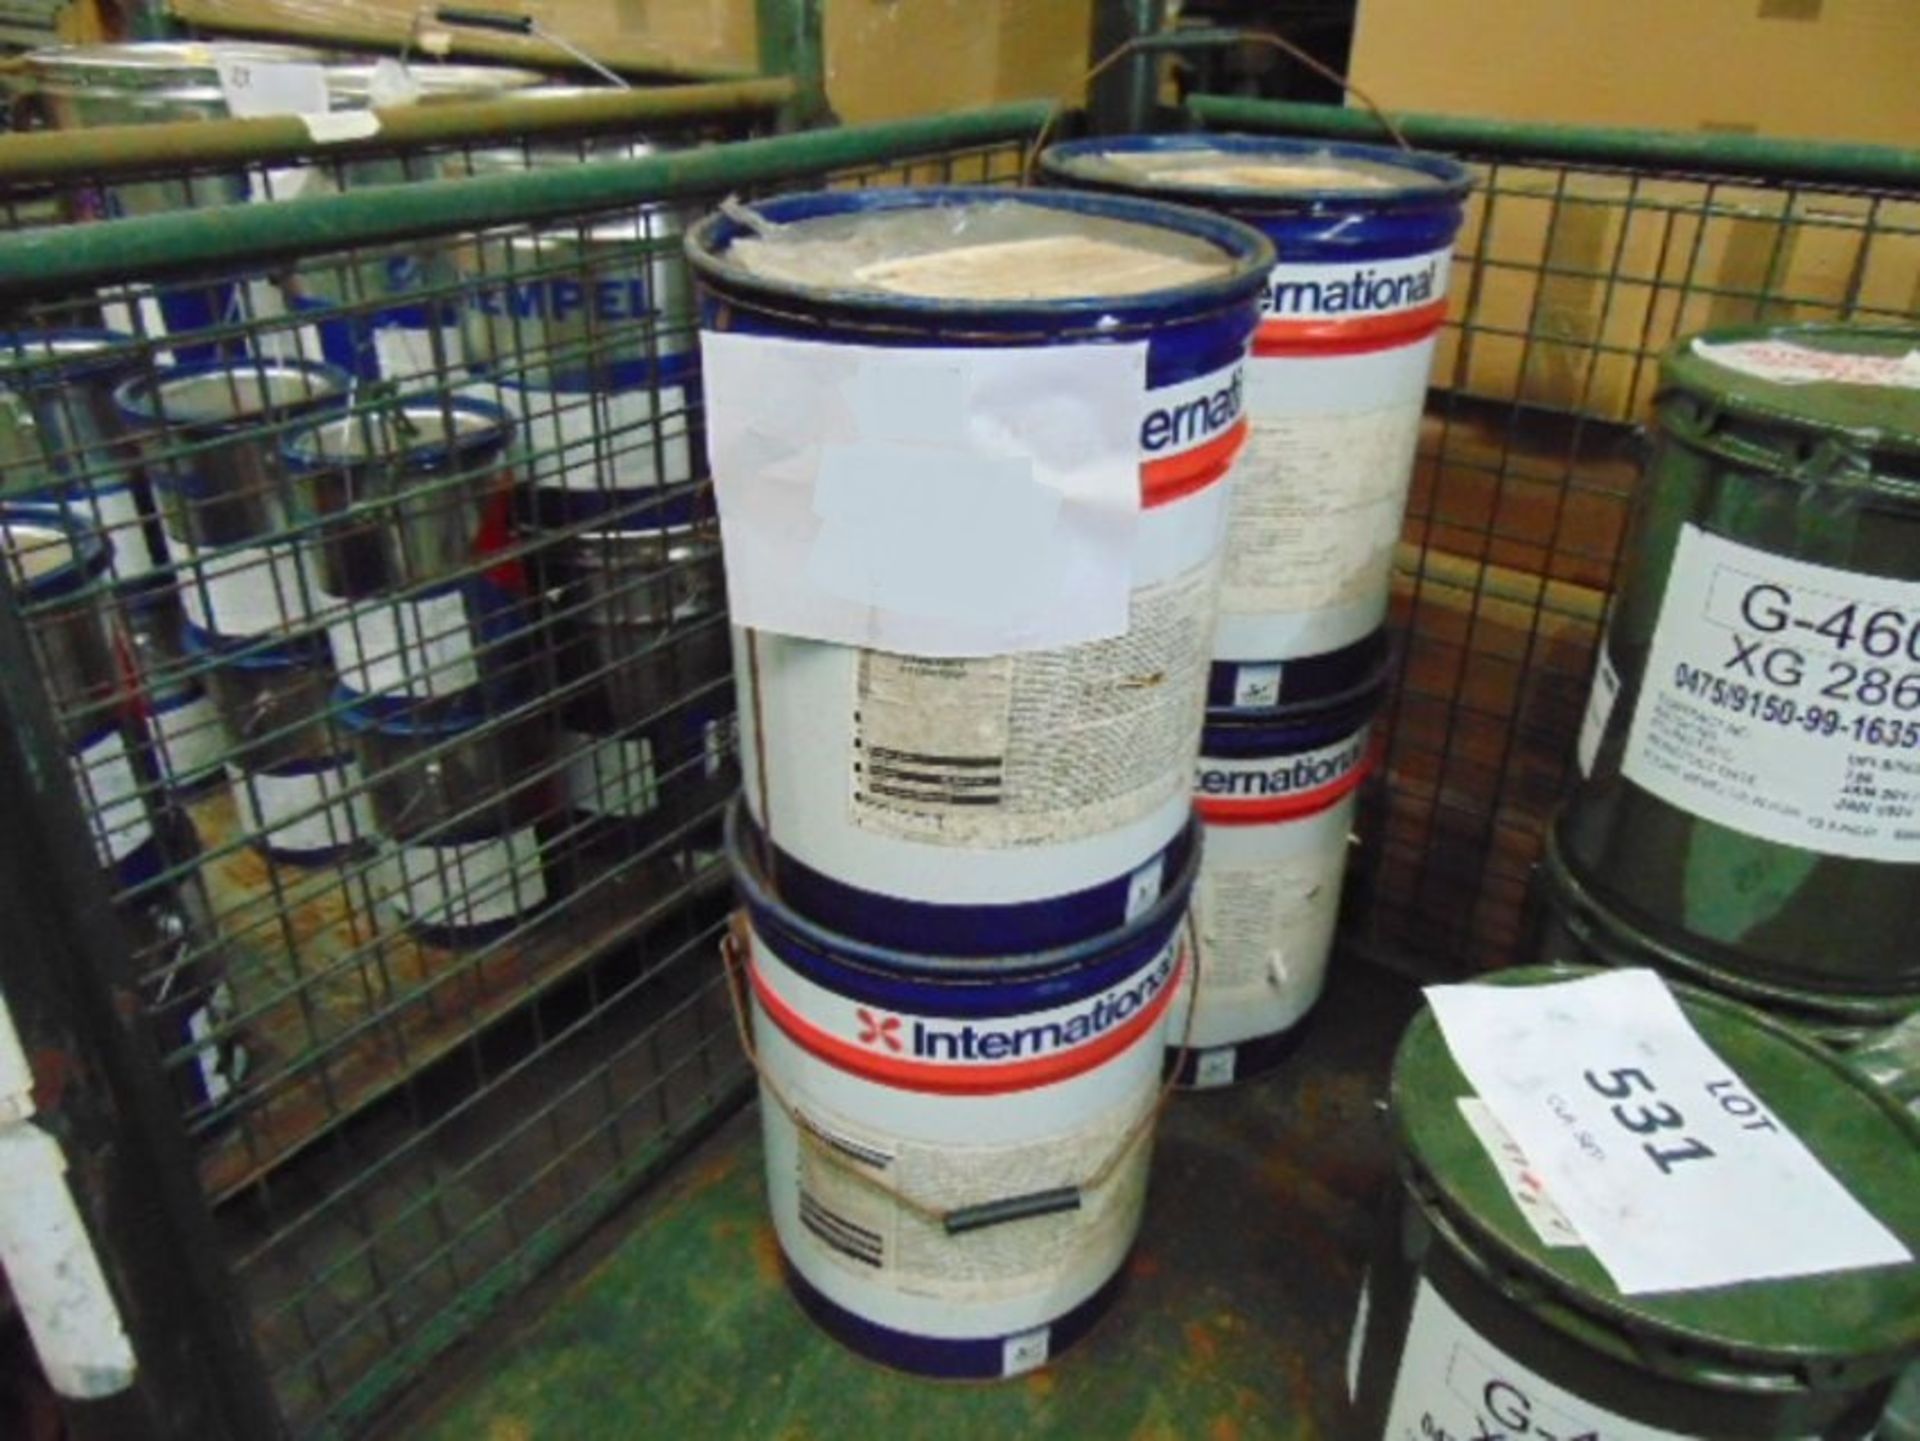 4x 20 litre Drums of International 700 Single Pack Wates based Weathers Resistant Grey Paint